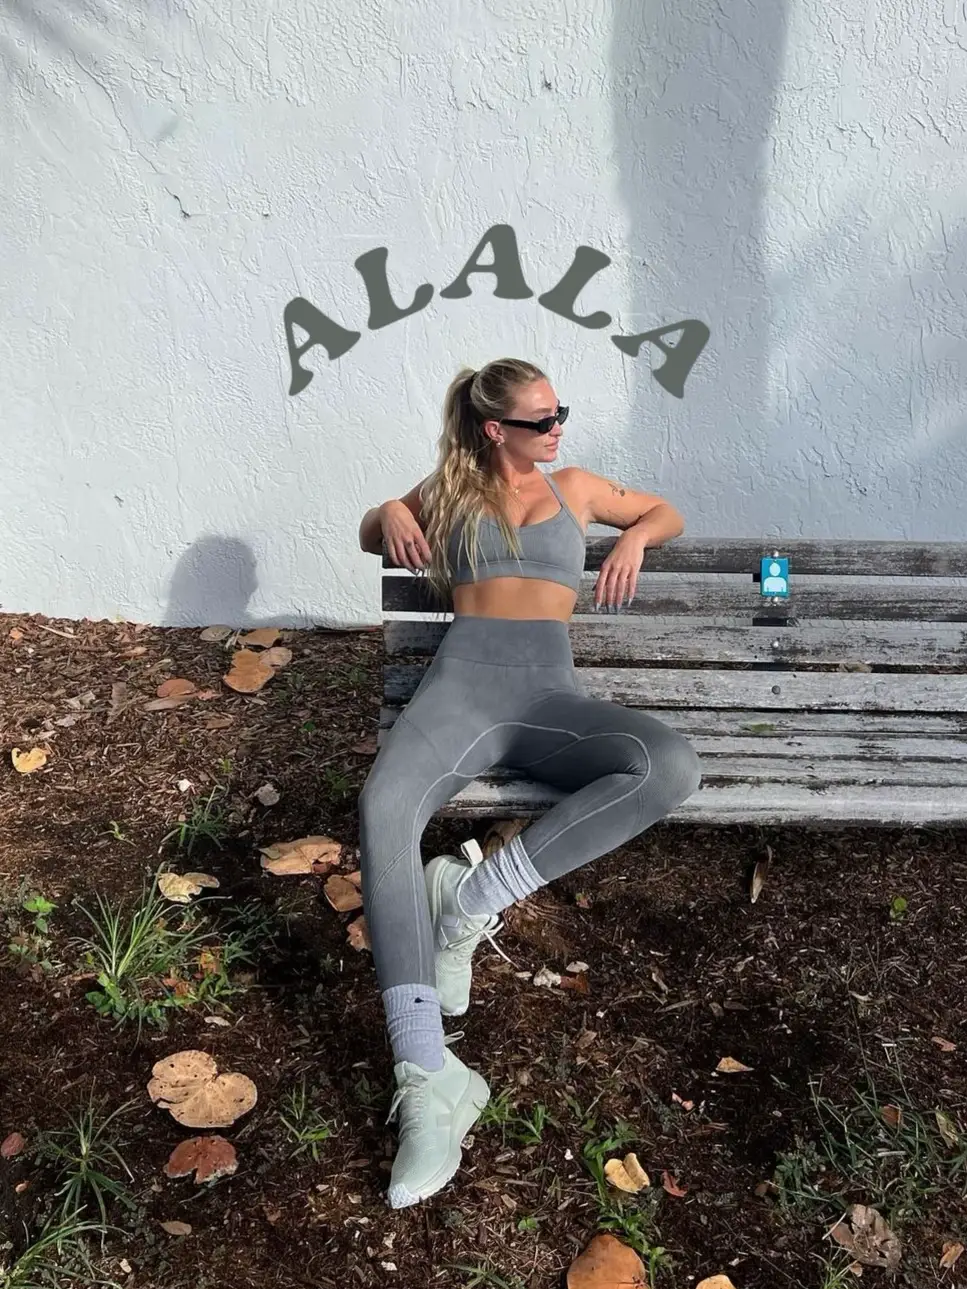 The energy bra high neck finally made it👏 Paired with melanite aligns :  r/lululemon